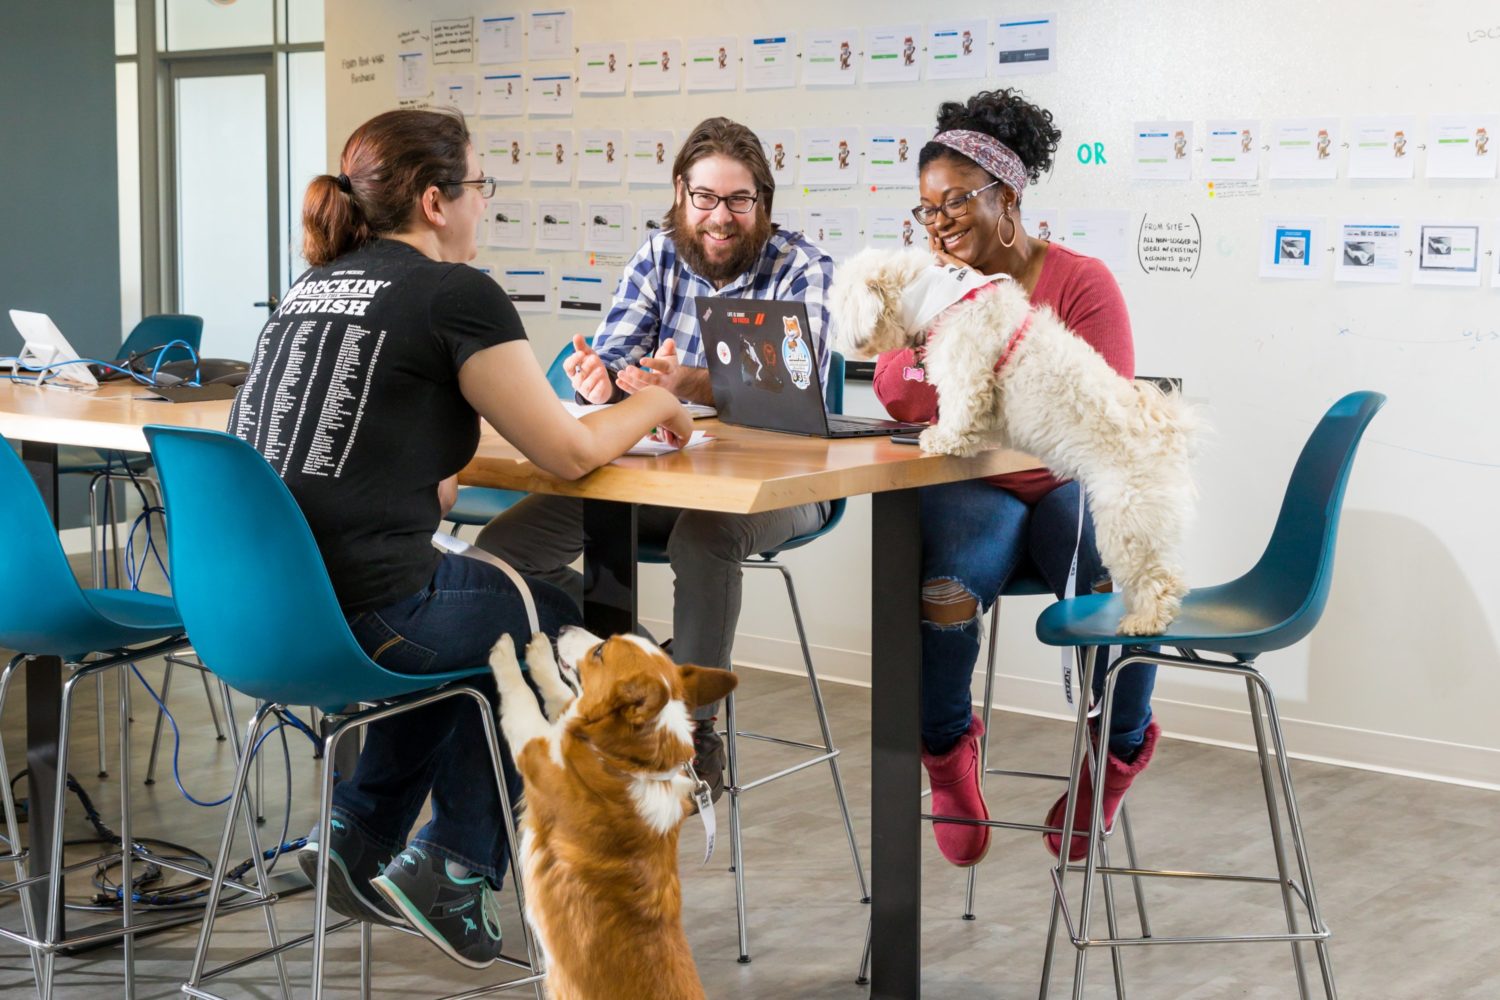 Carfax's work-hard/play-hard culture includes allowing dogs in the office. Photograph by Dan Chung.